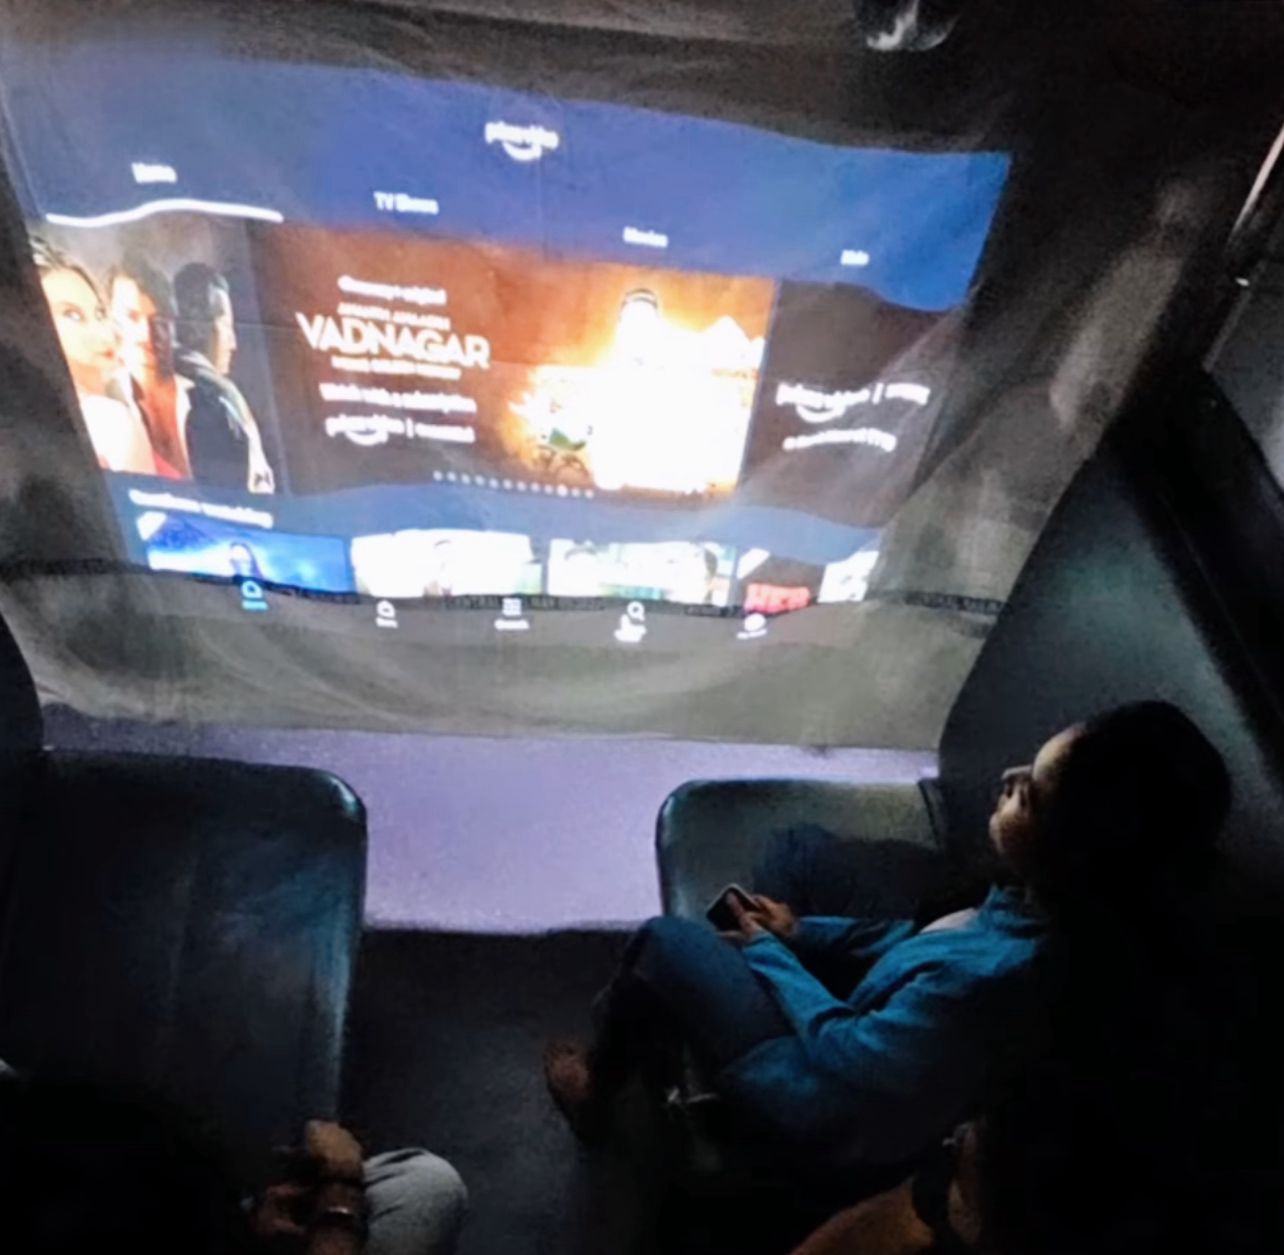 Film played from projector in train compartment